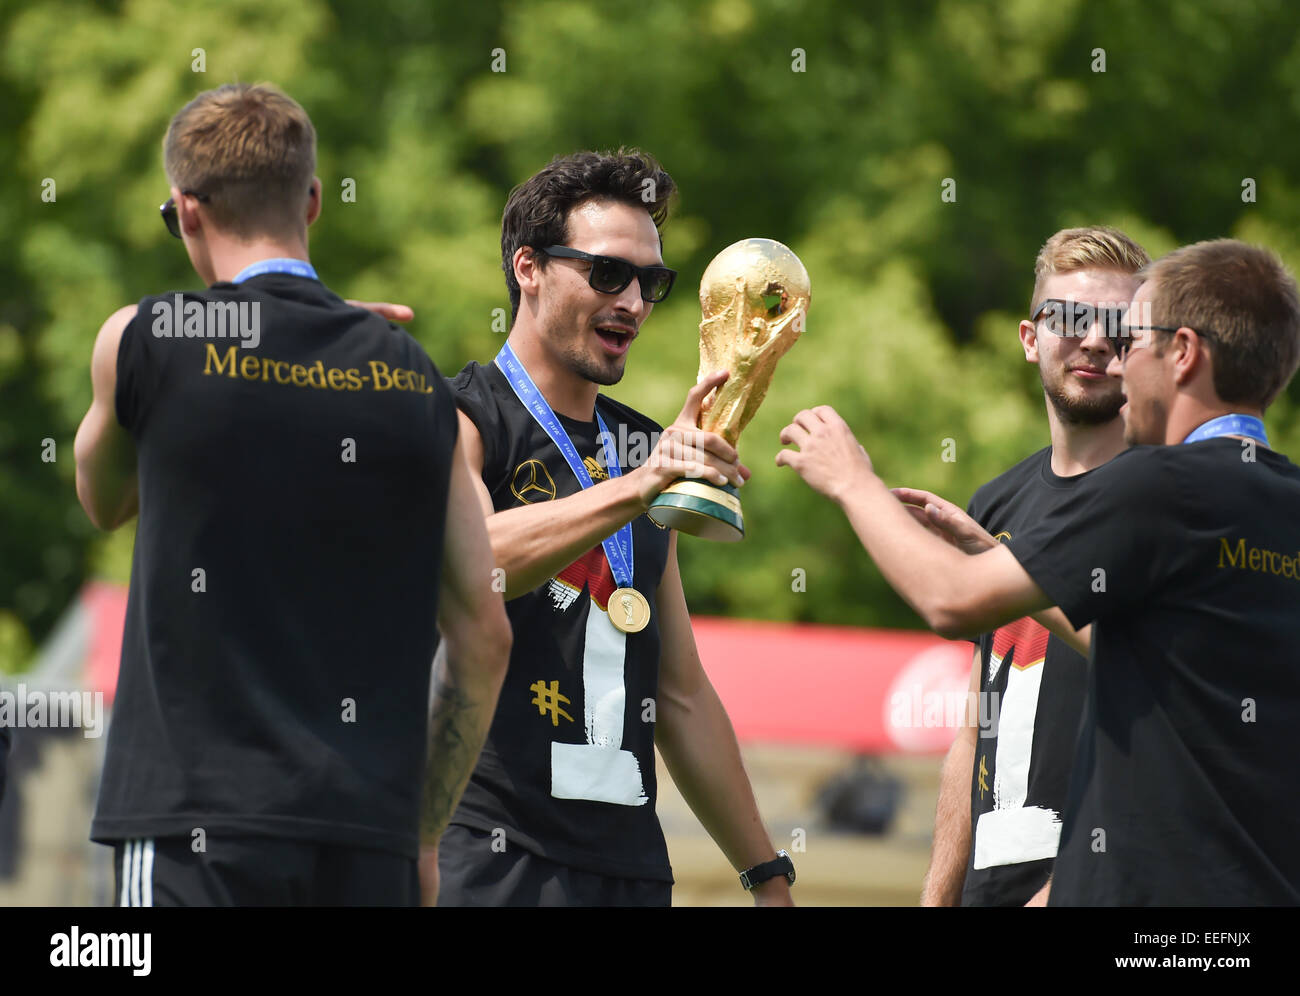 The Germany national football team celebrating their victory at Brandenburg Gate (Brandenburger Tor). 400,000 fans gathered at the so called Fanmeile to greet the winners of the 2014 World Cup.  Featuring: Mats Hummels,Philipp Lahm,Christoph Kramer,Guest Stock Photo